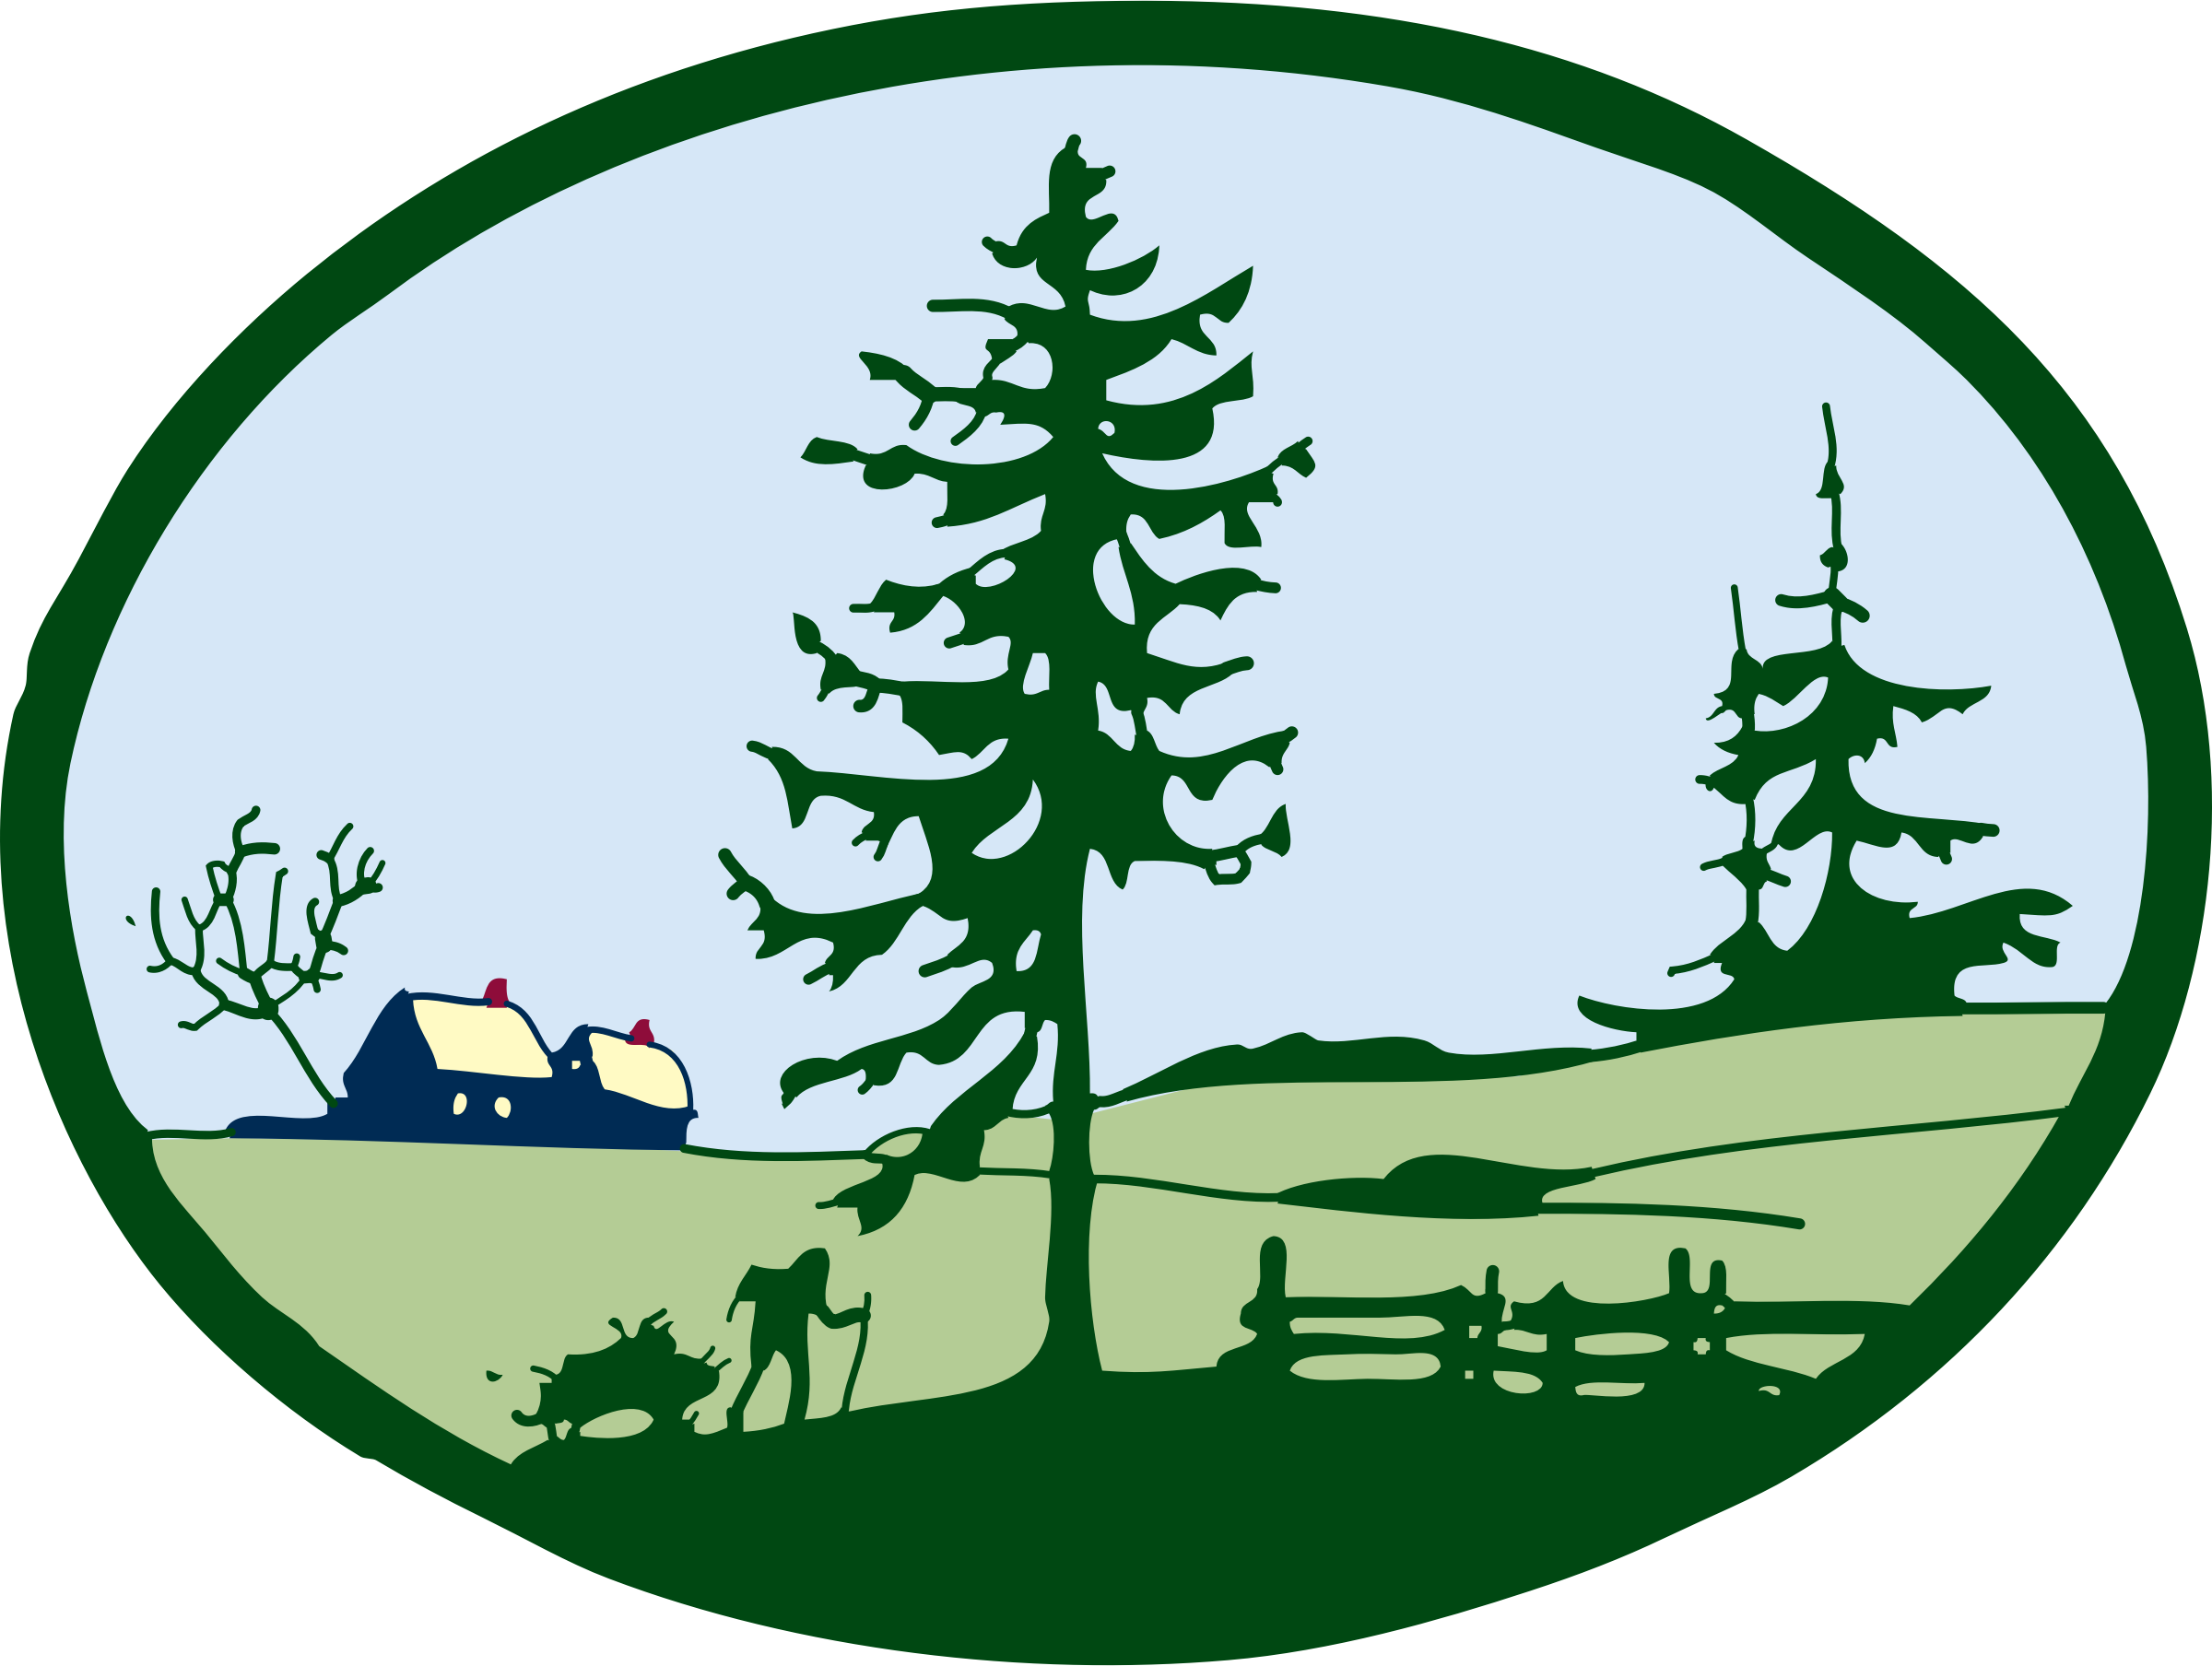 forest clipart forest scene